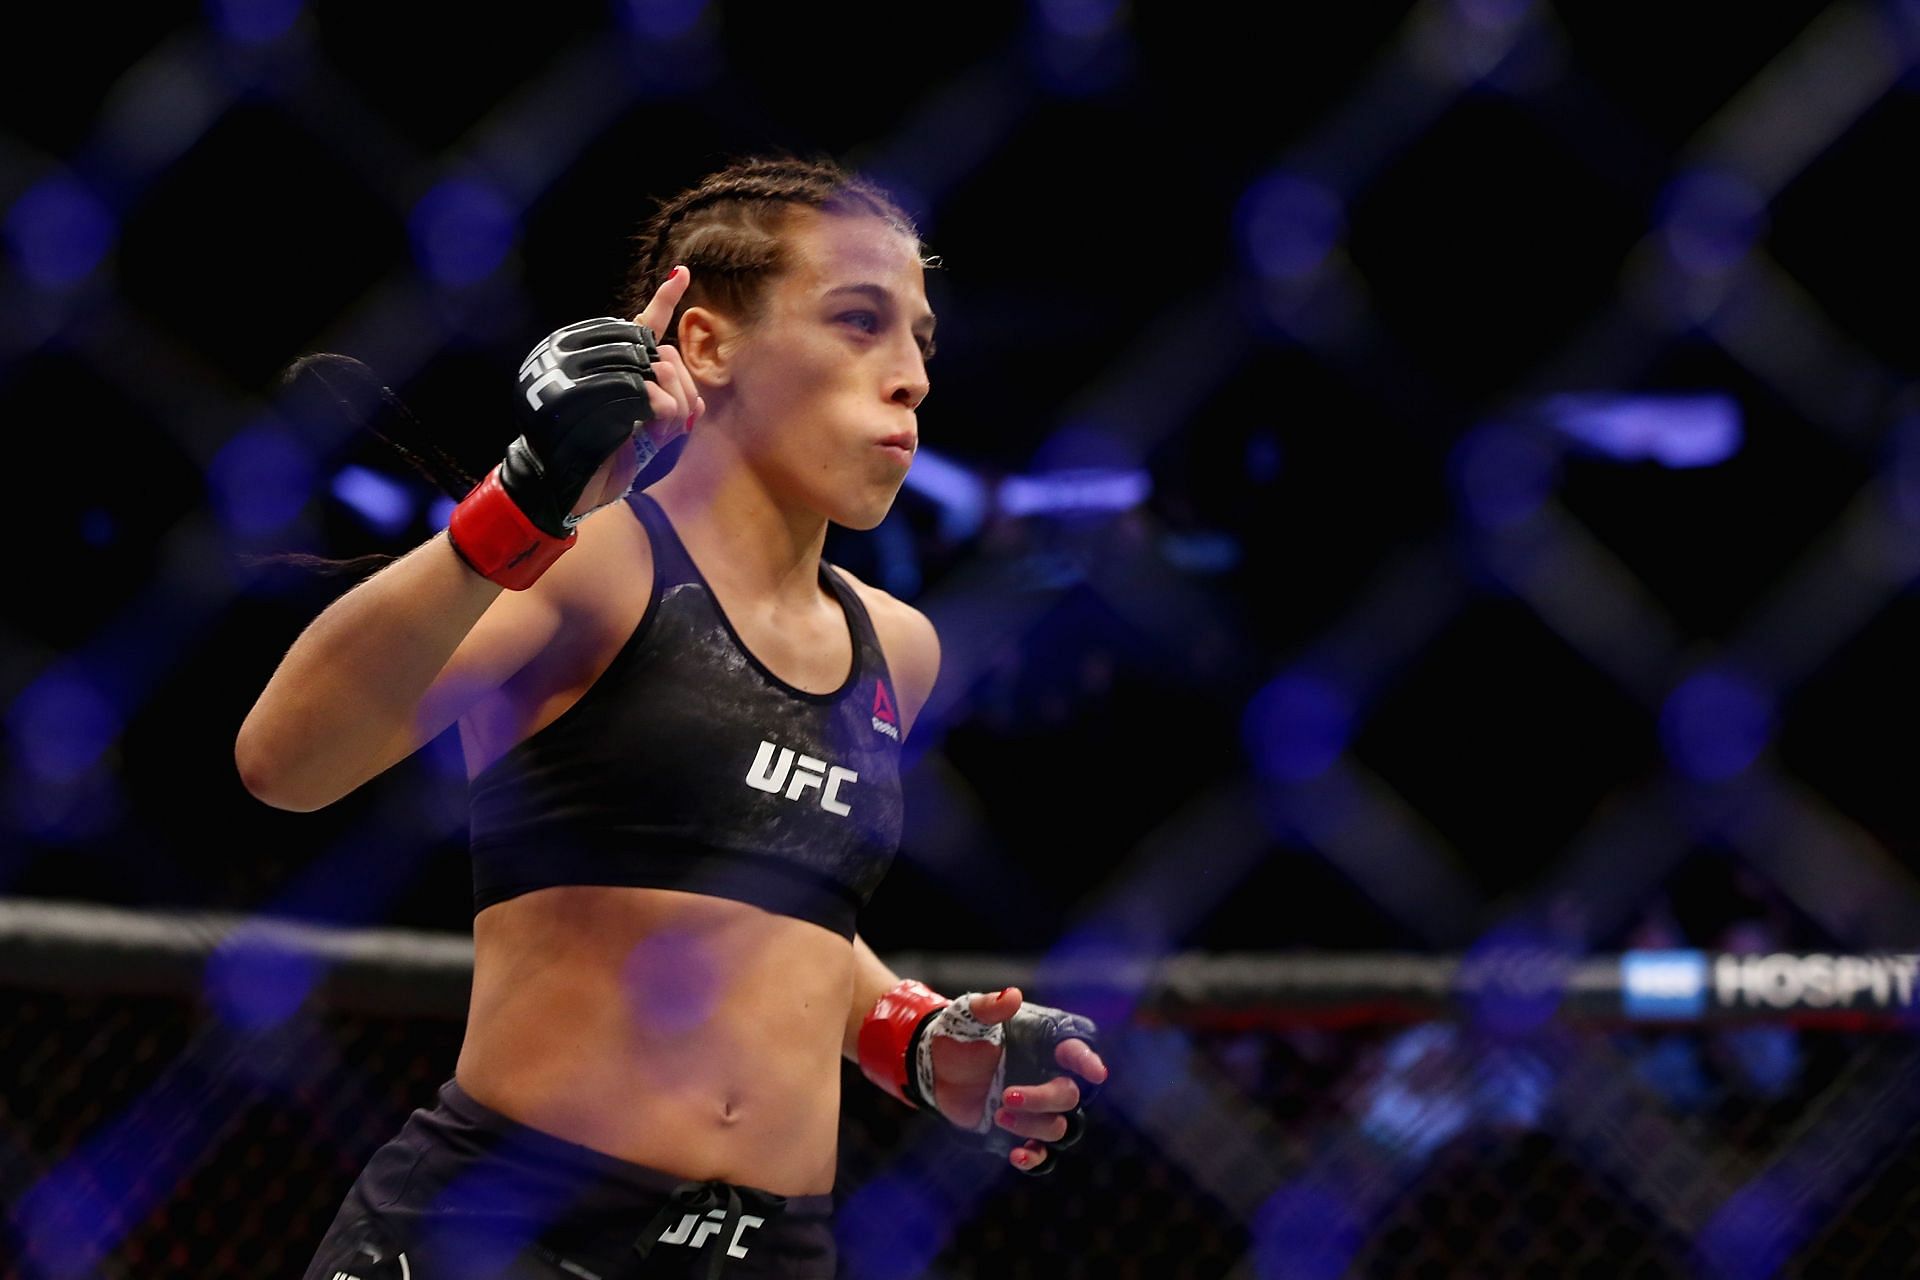 Joanna Jedrzejczyk&#039;s record of five successful strawweight title defenses has never been beaten